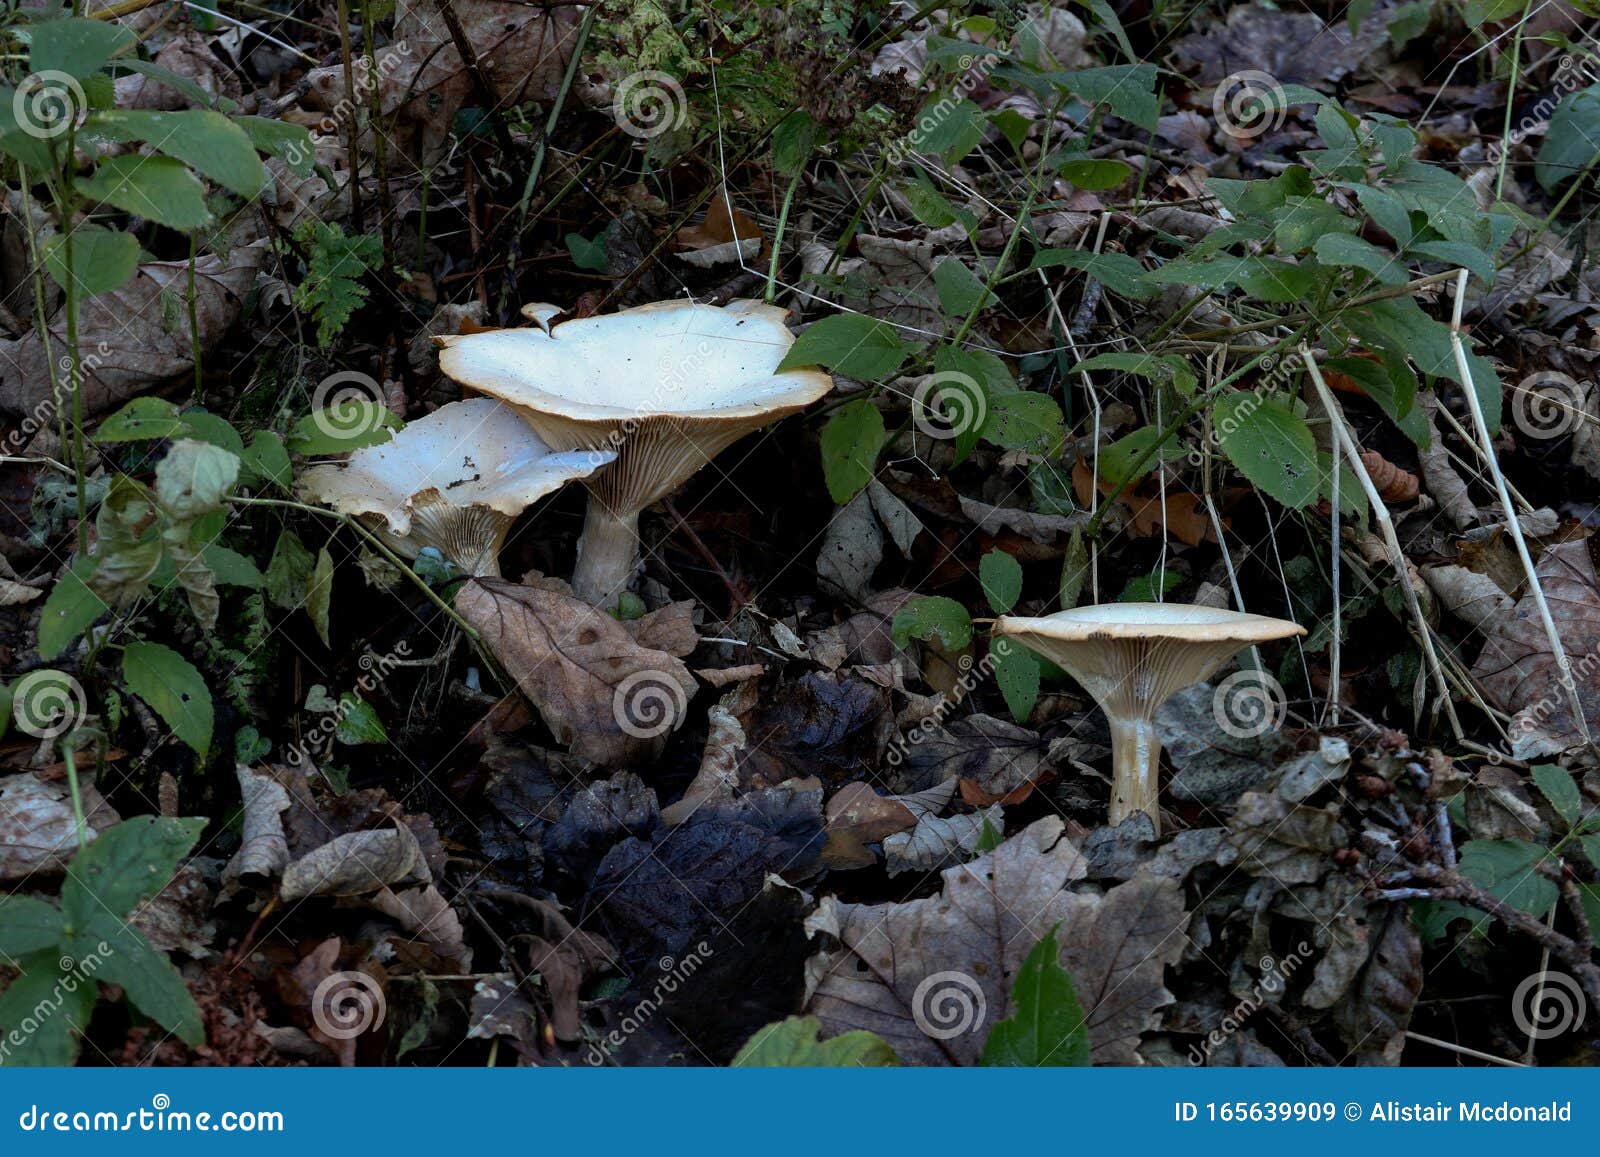 trooping funnel mushroom in a forest